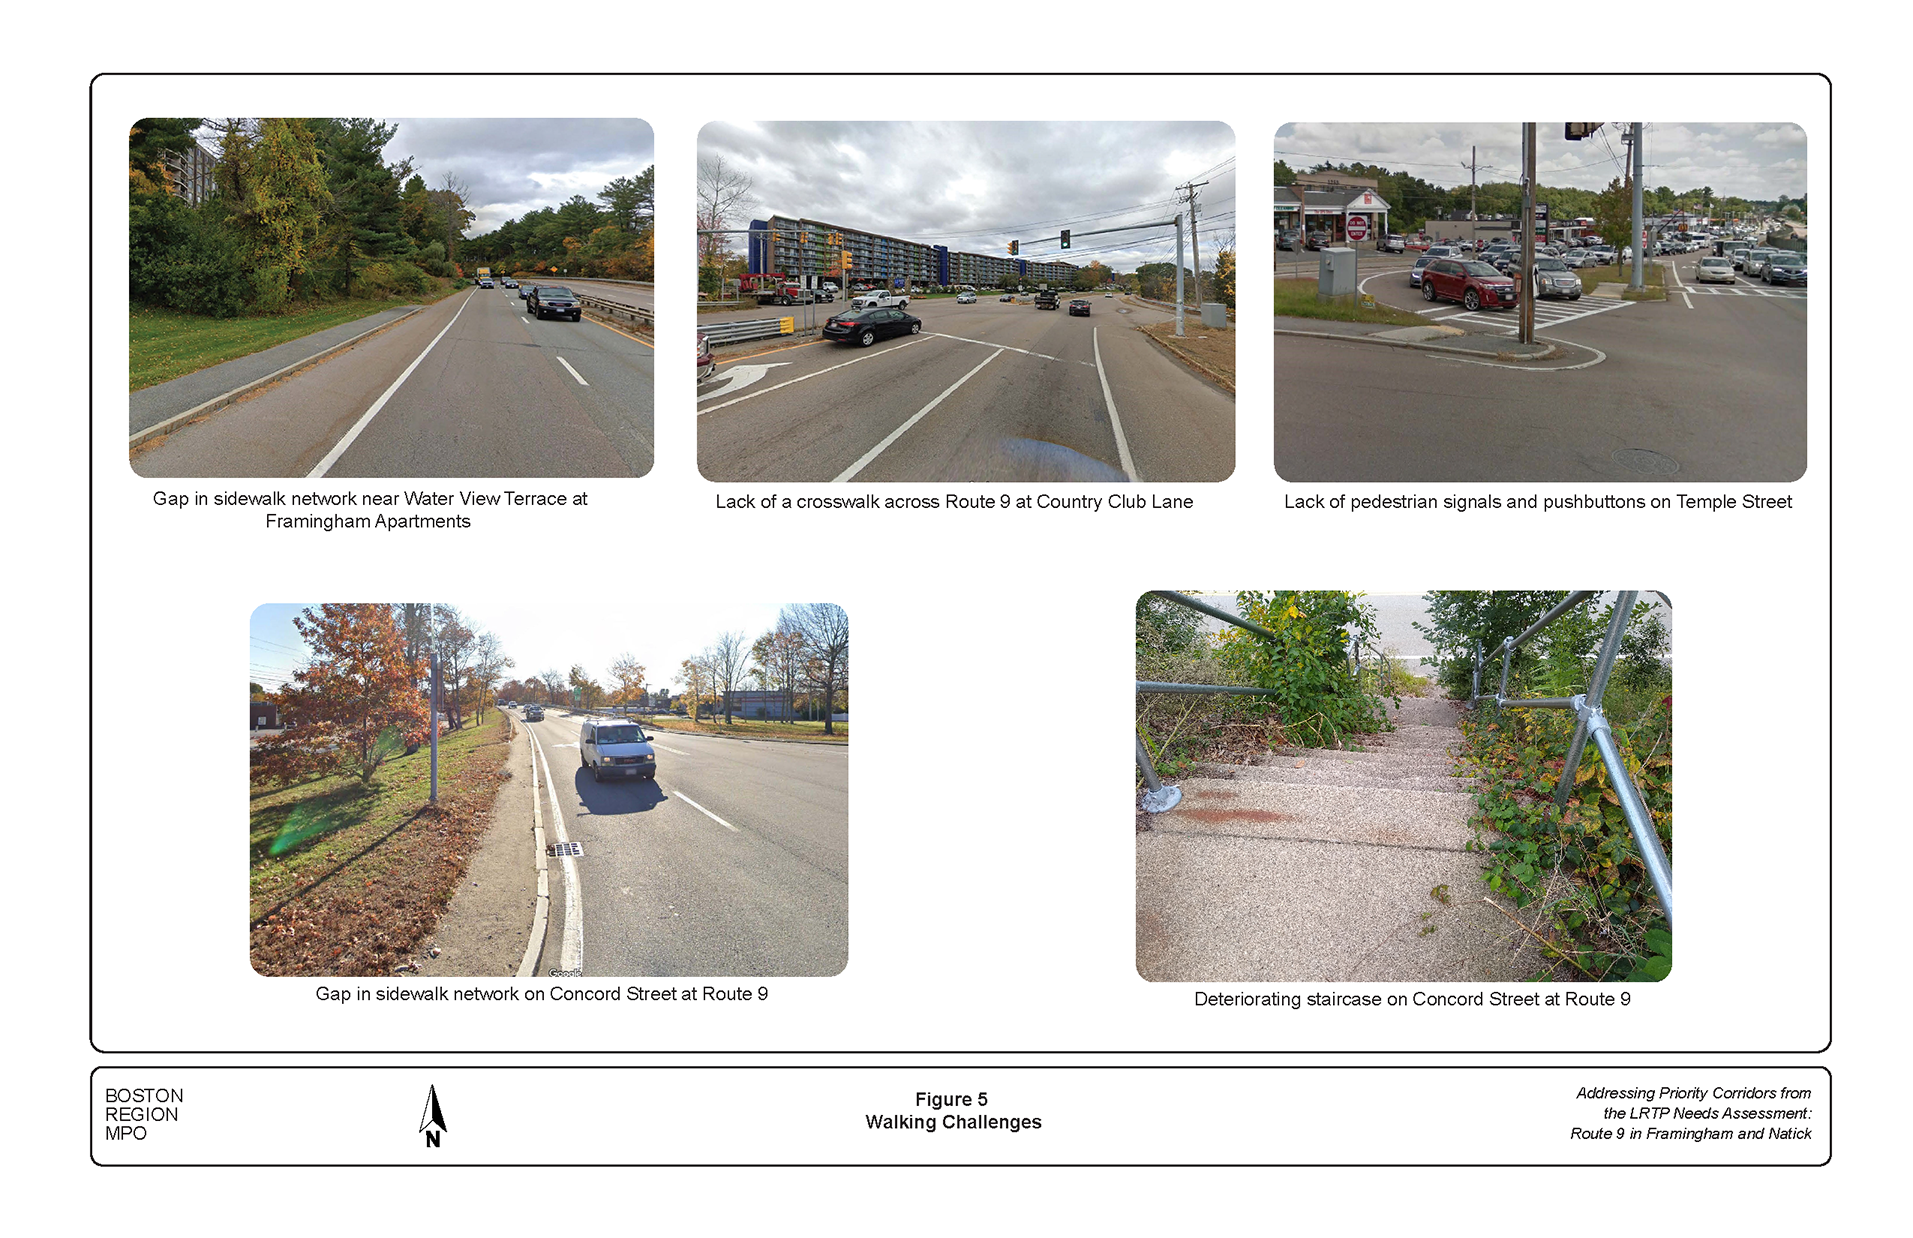 Figure 5 includes photos illustrating challenges for people walking in the Route 9 corridor